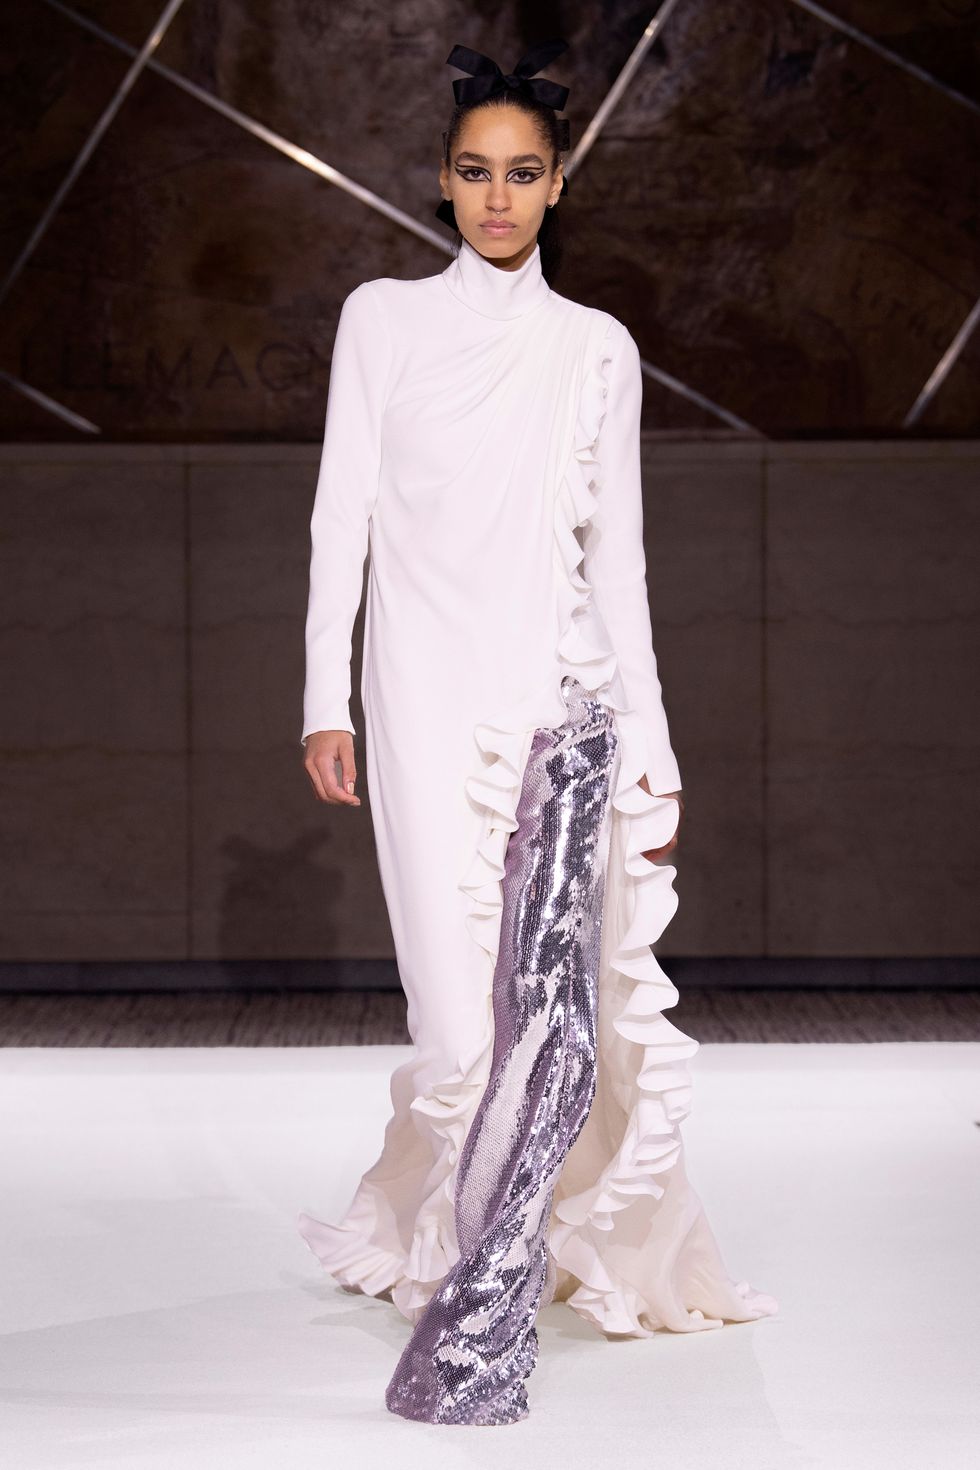 Spring 2022 Couture Was Inspired By Science Fiction